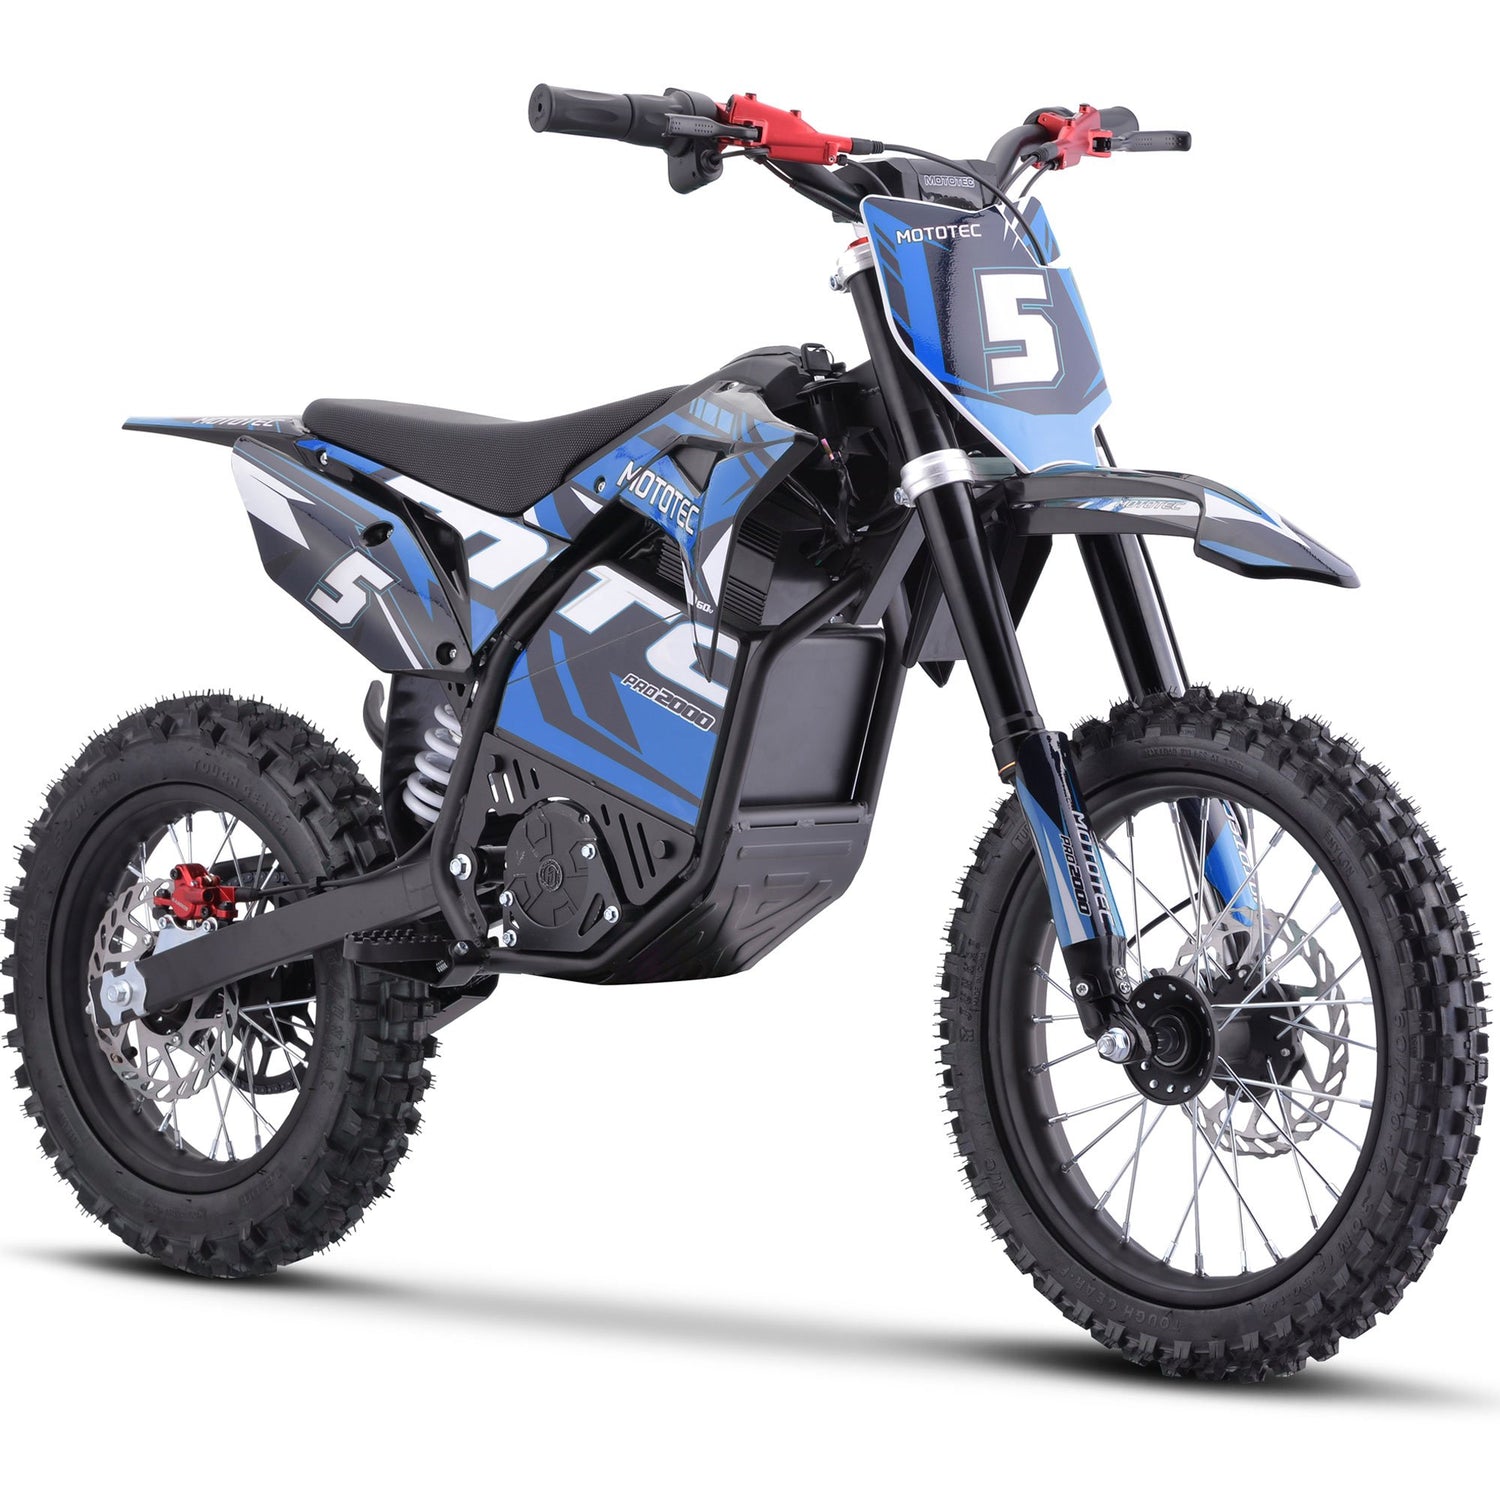 Introducing the new MotoTec 60v 2000w Lithium Pro Electric Dirt Bike!